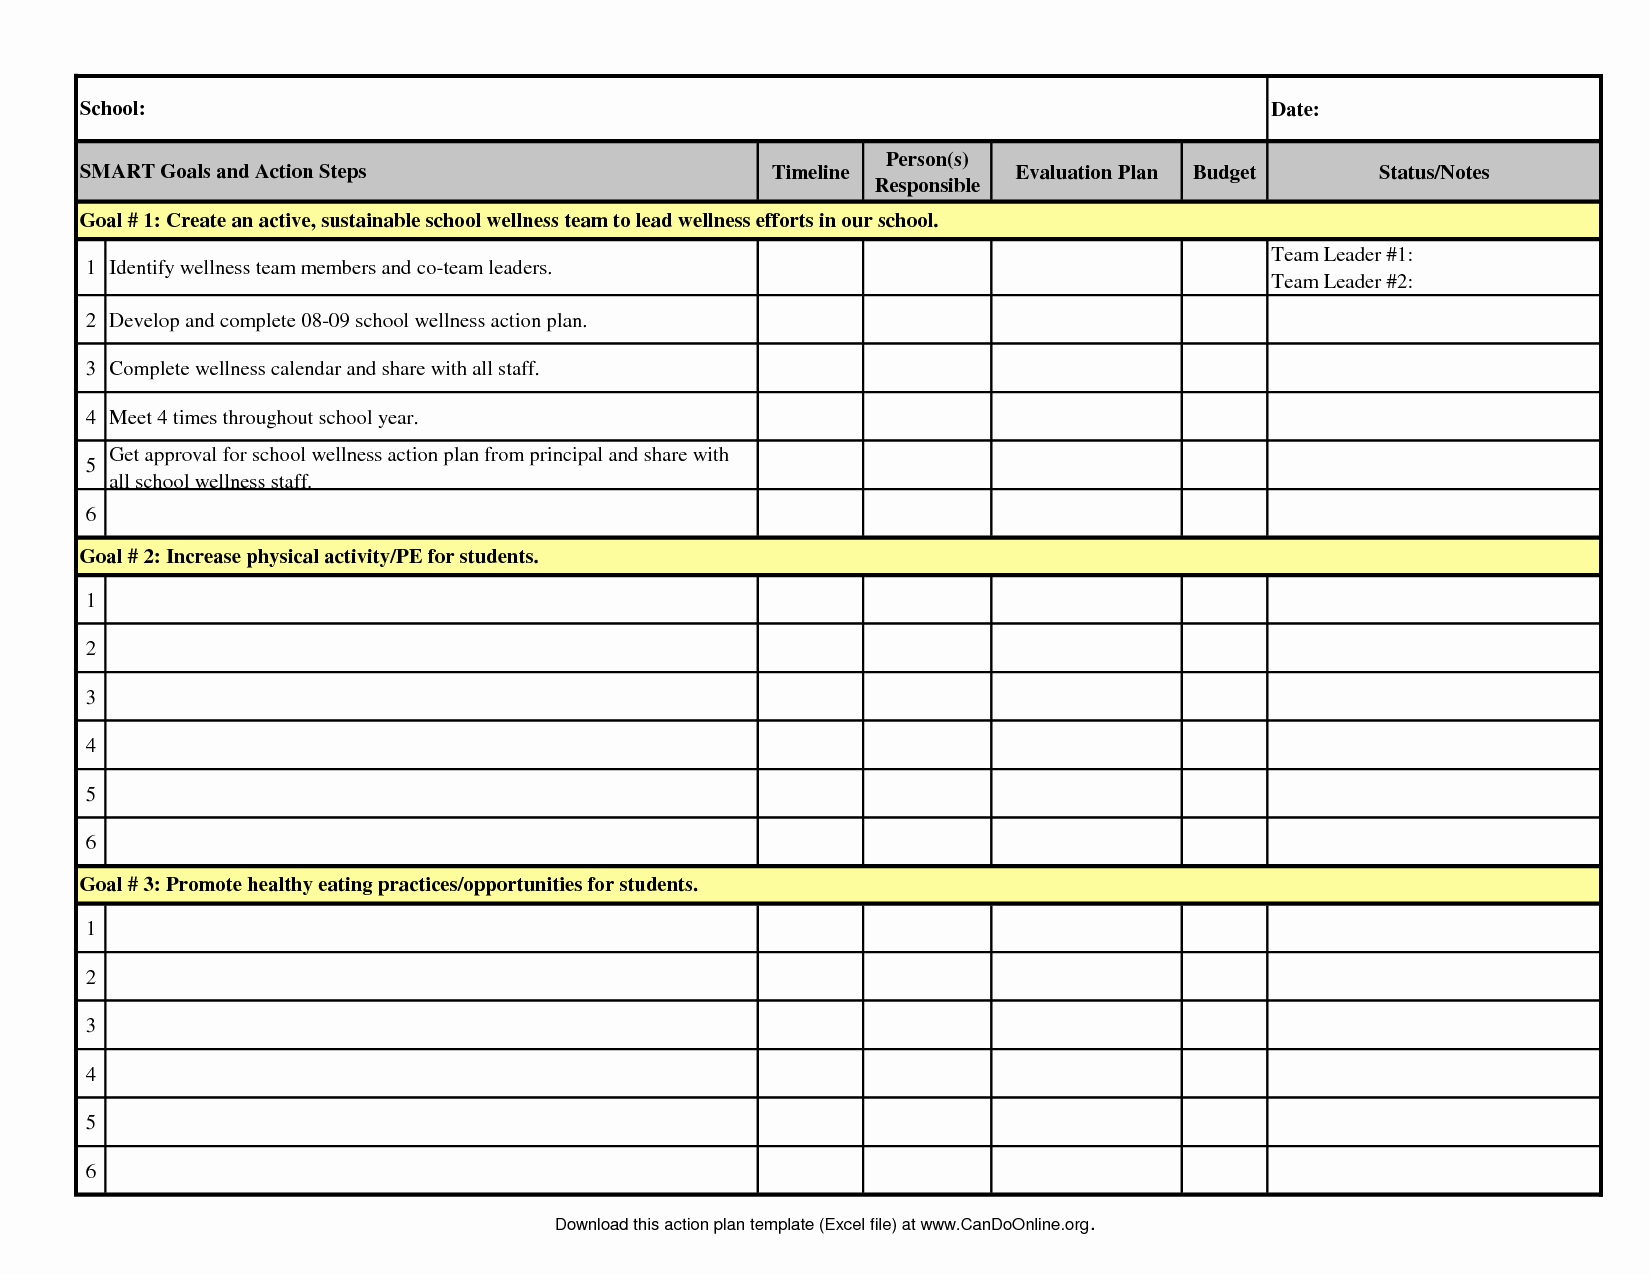 Action Plan Template Excel Best Of Action Plan Template 2008 09 Excel Cadqgtfa